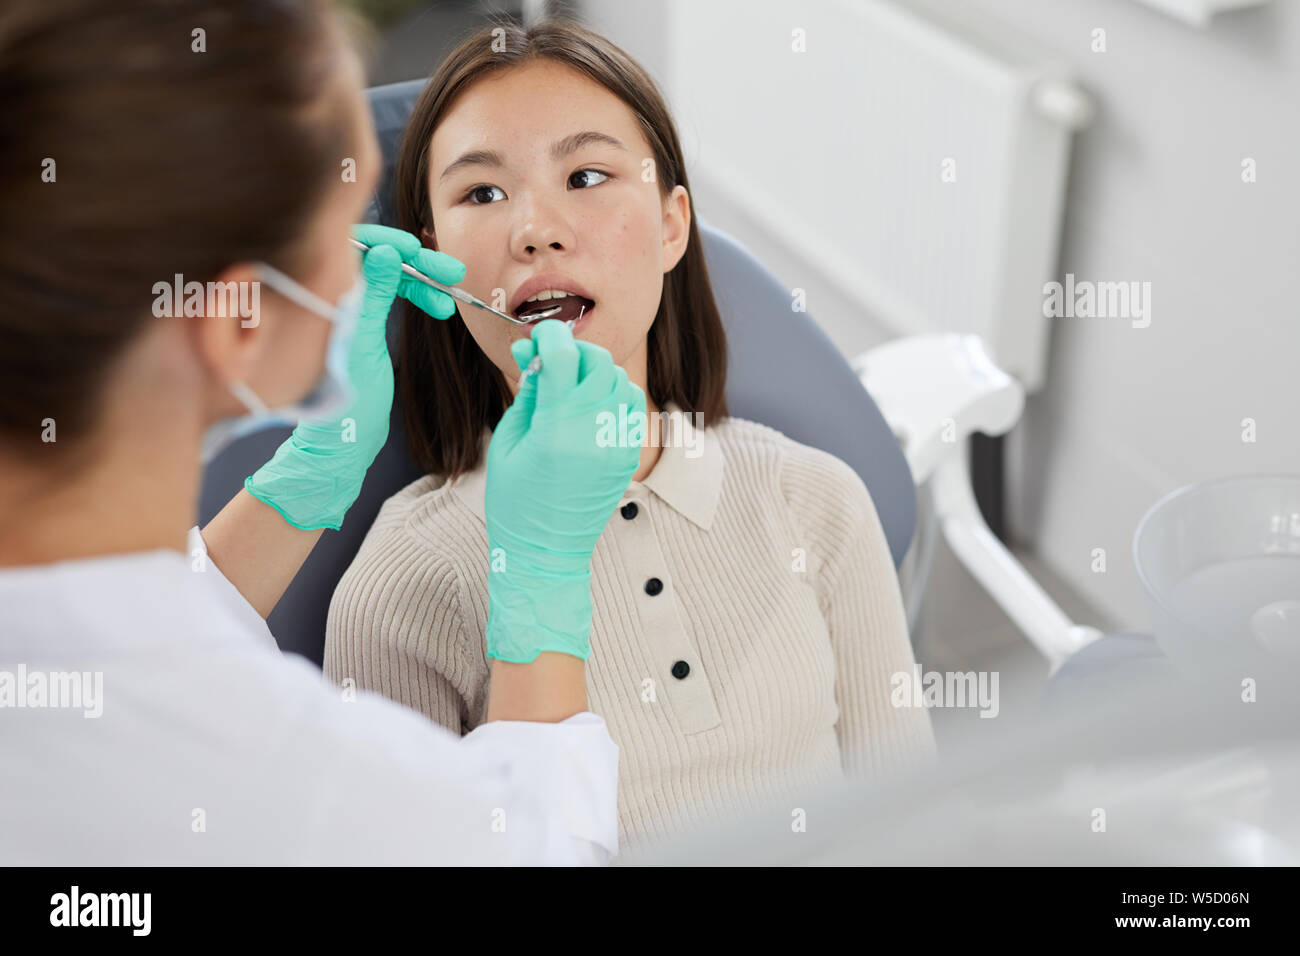 High angle portrait of Asian girl lying in dental chair with female dentist examining teeth, copy space Stock Photo